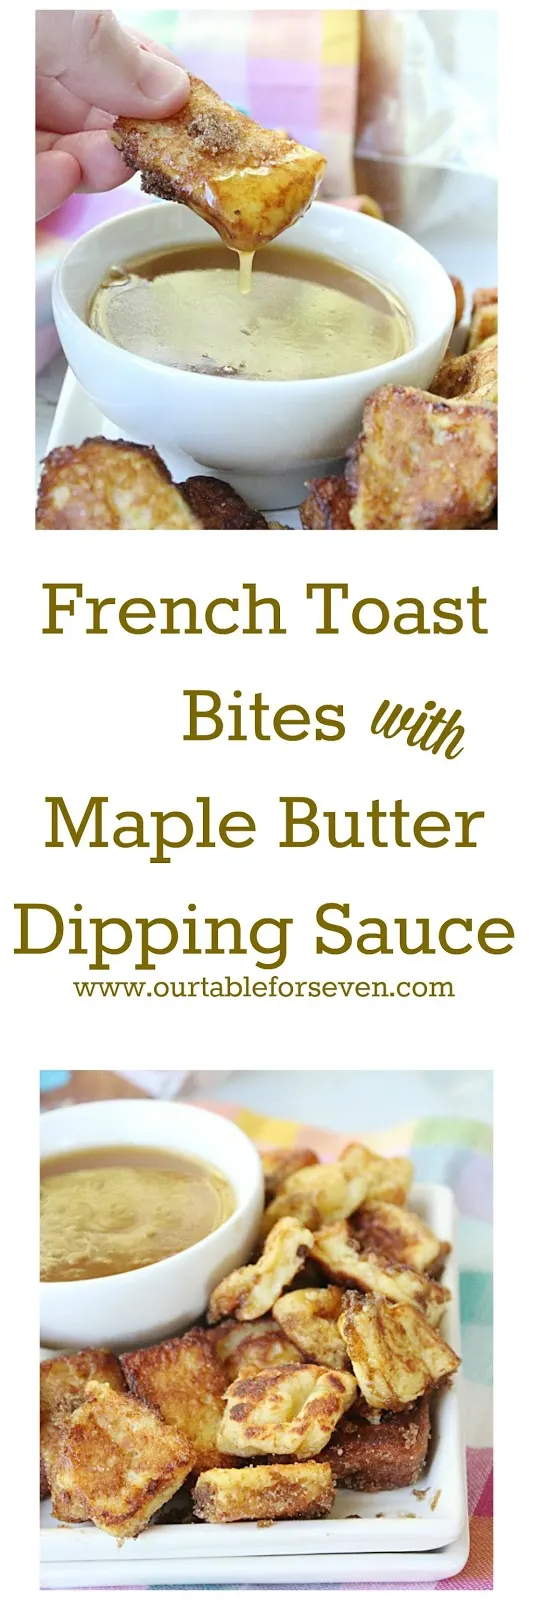 French Toast Bites with Maple Butter Dipping Sauce pin image